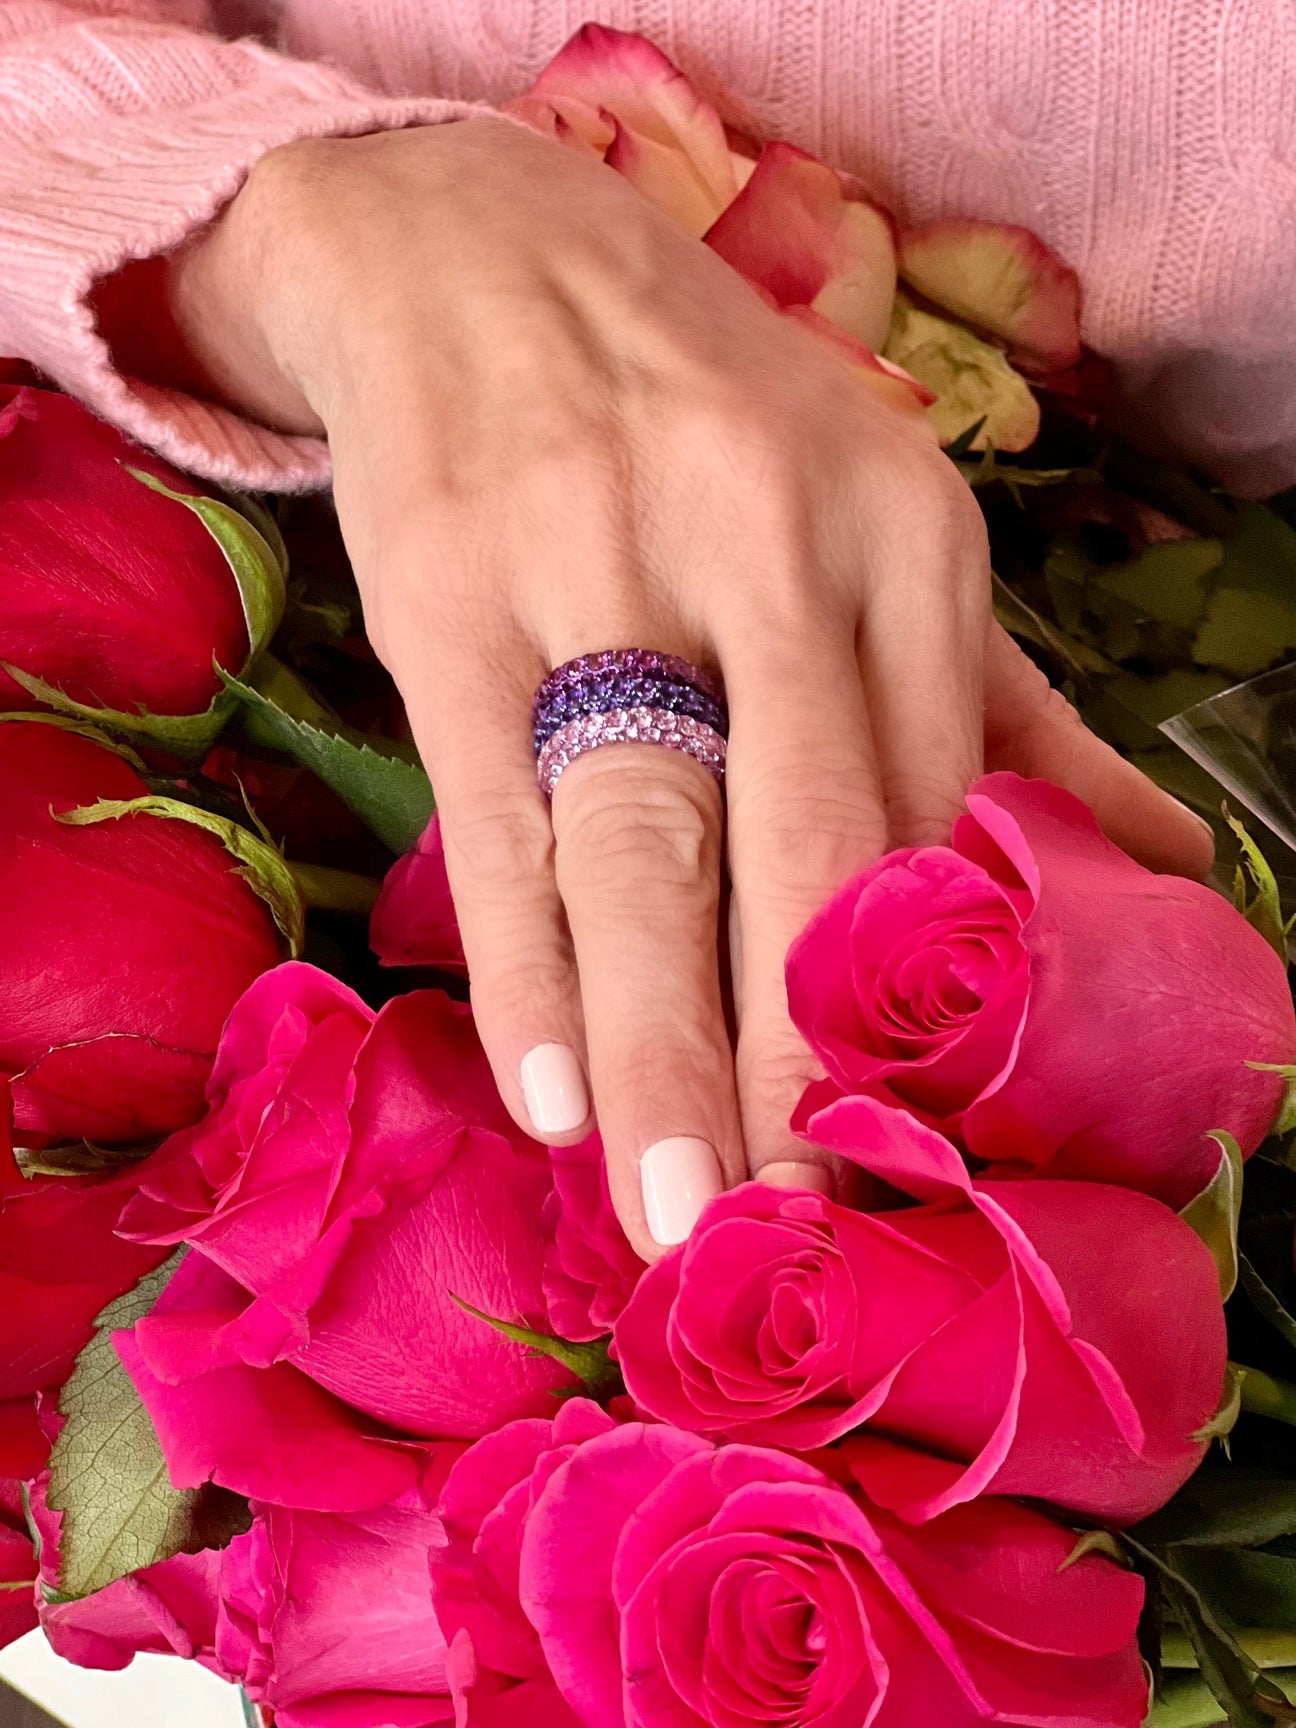 Pink Sapphire & Pink Rhodium 3 Sided Ring